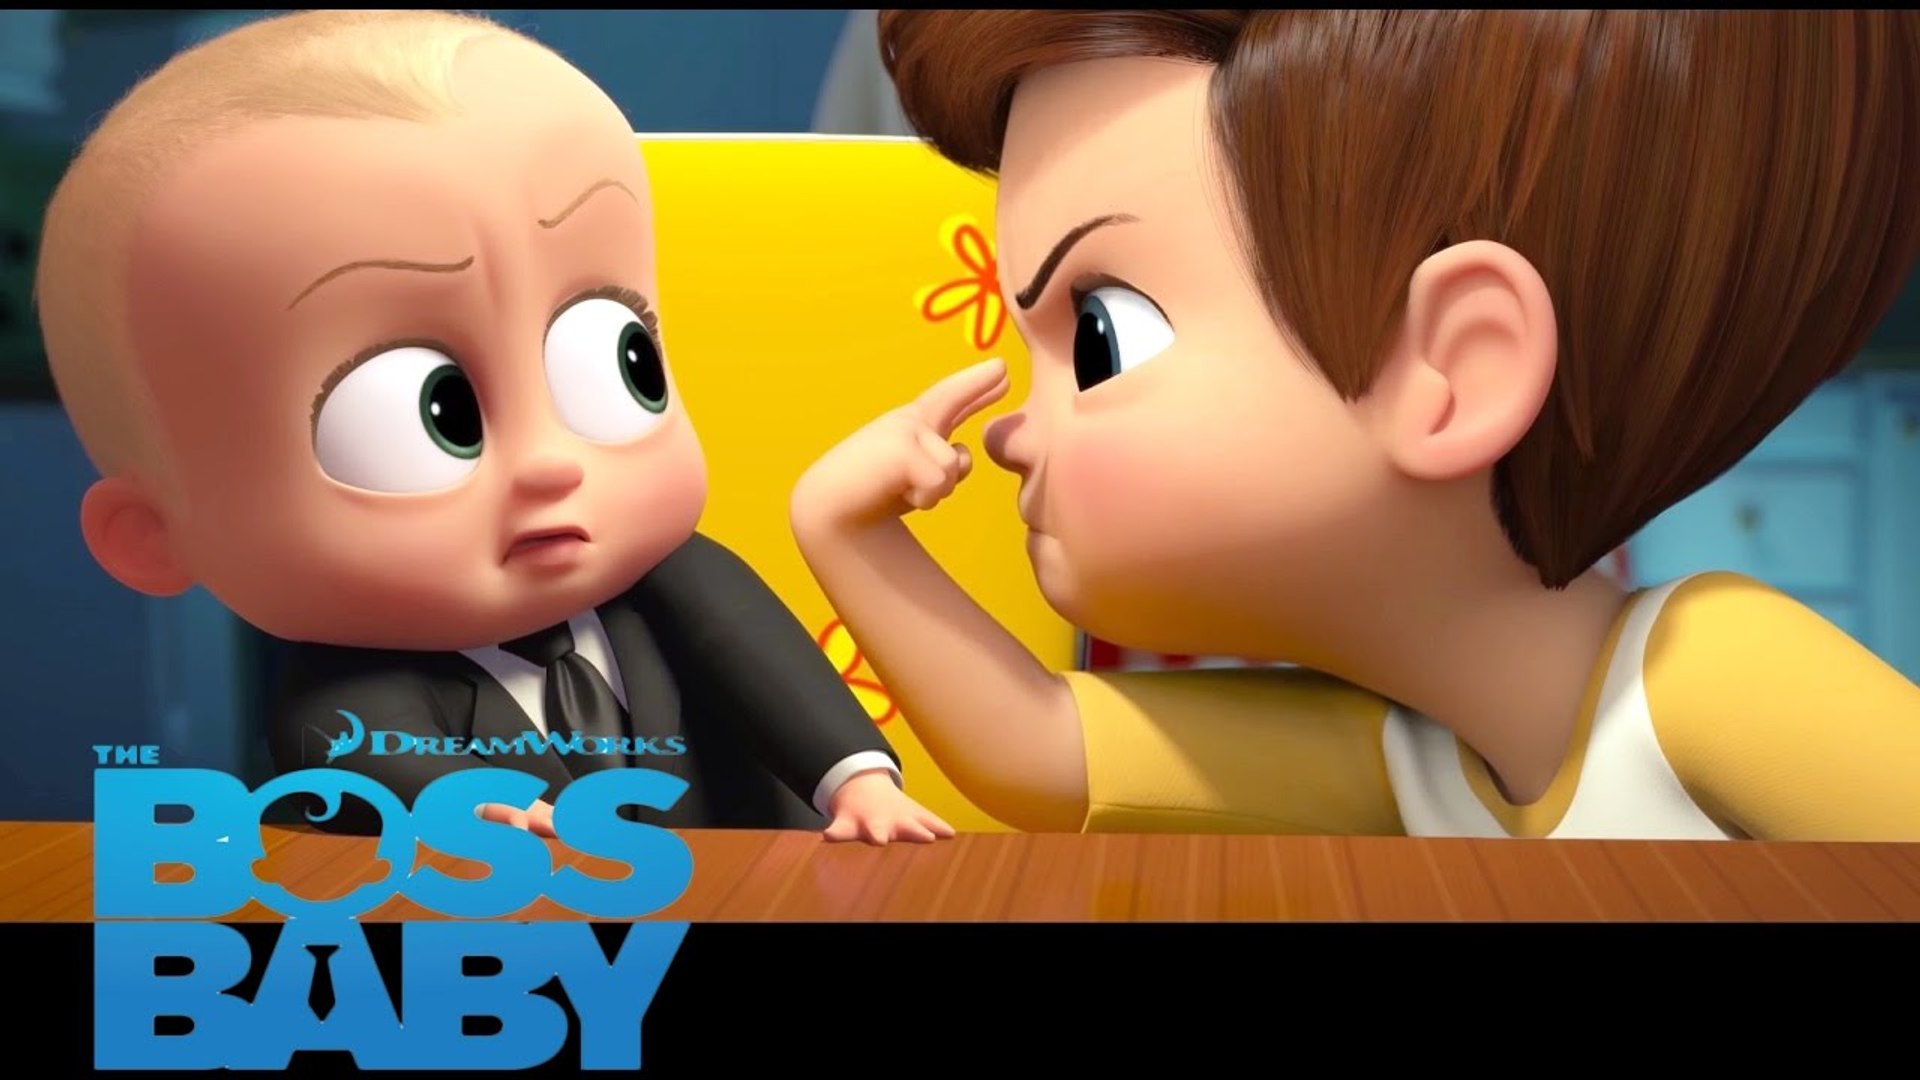 boss baby (2017) Full Length Movies - video Dailymotion